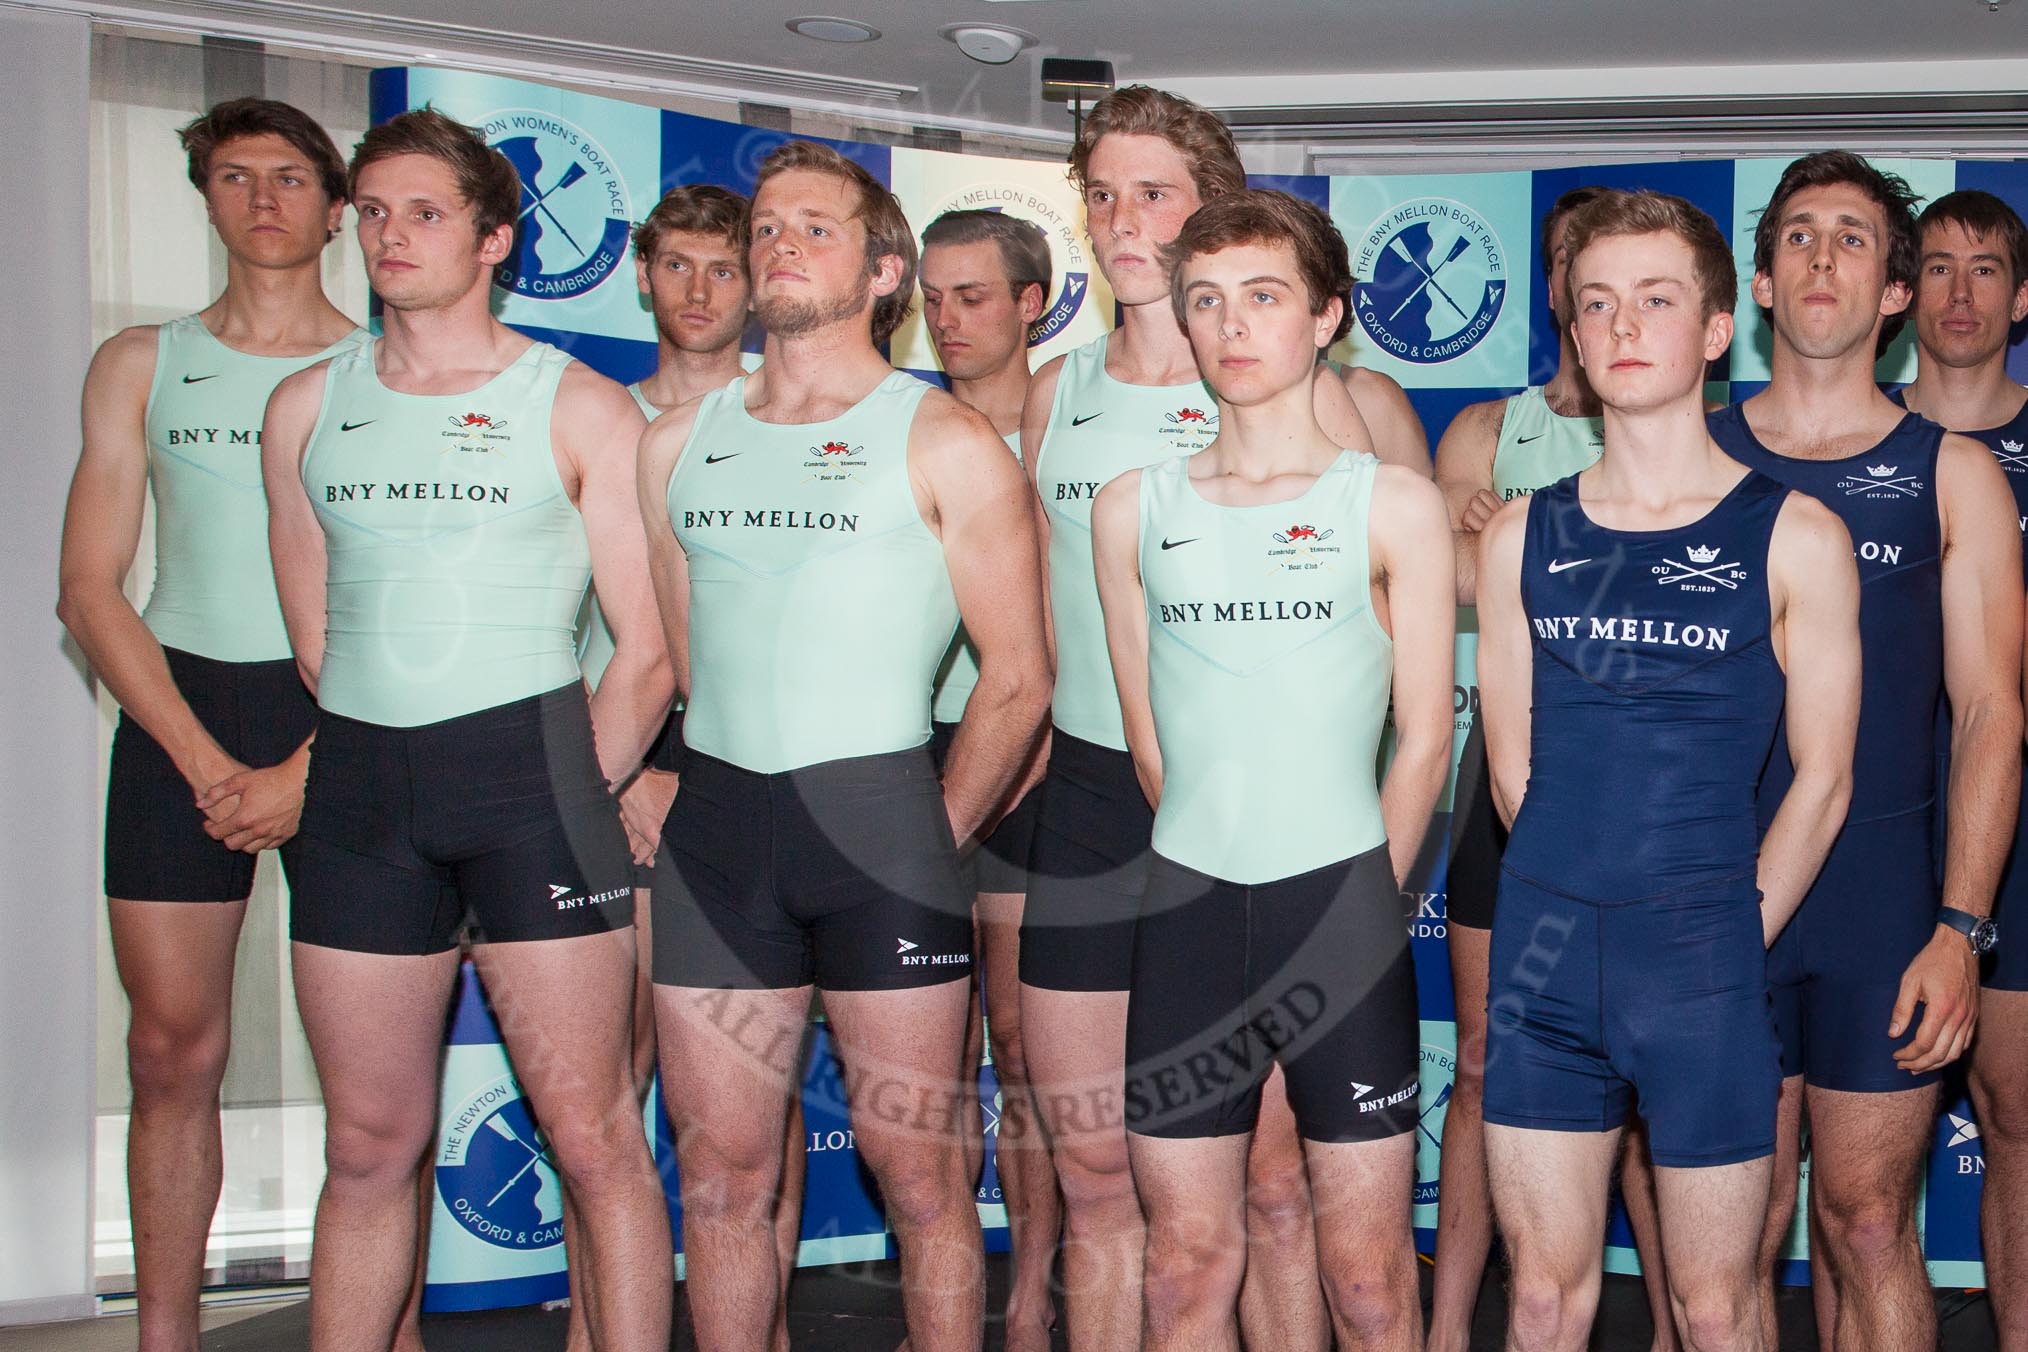 The Boat Race season 2014 - Crew Announcement and Weigh In: Group shot - The Boat Race 2014 crews together on stage, here the Cambridge men..
BNY Mellon Centre,
London EC4V 4LA,
London,
United Kingdom,
on 10 March 2014 at 12:11, image #127